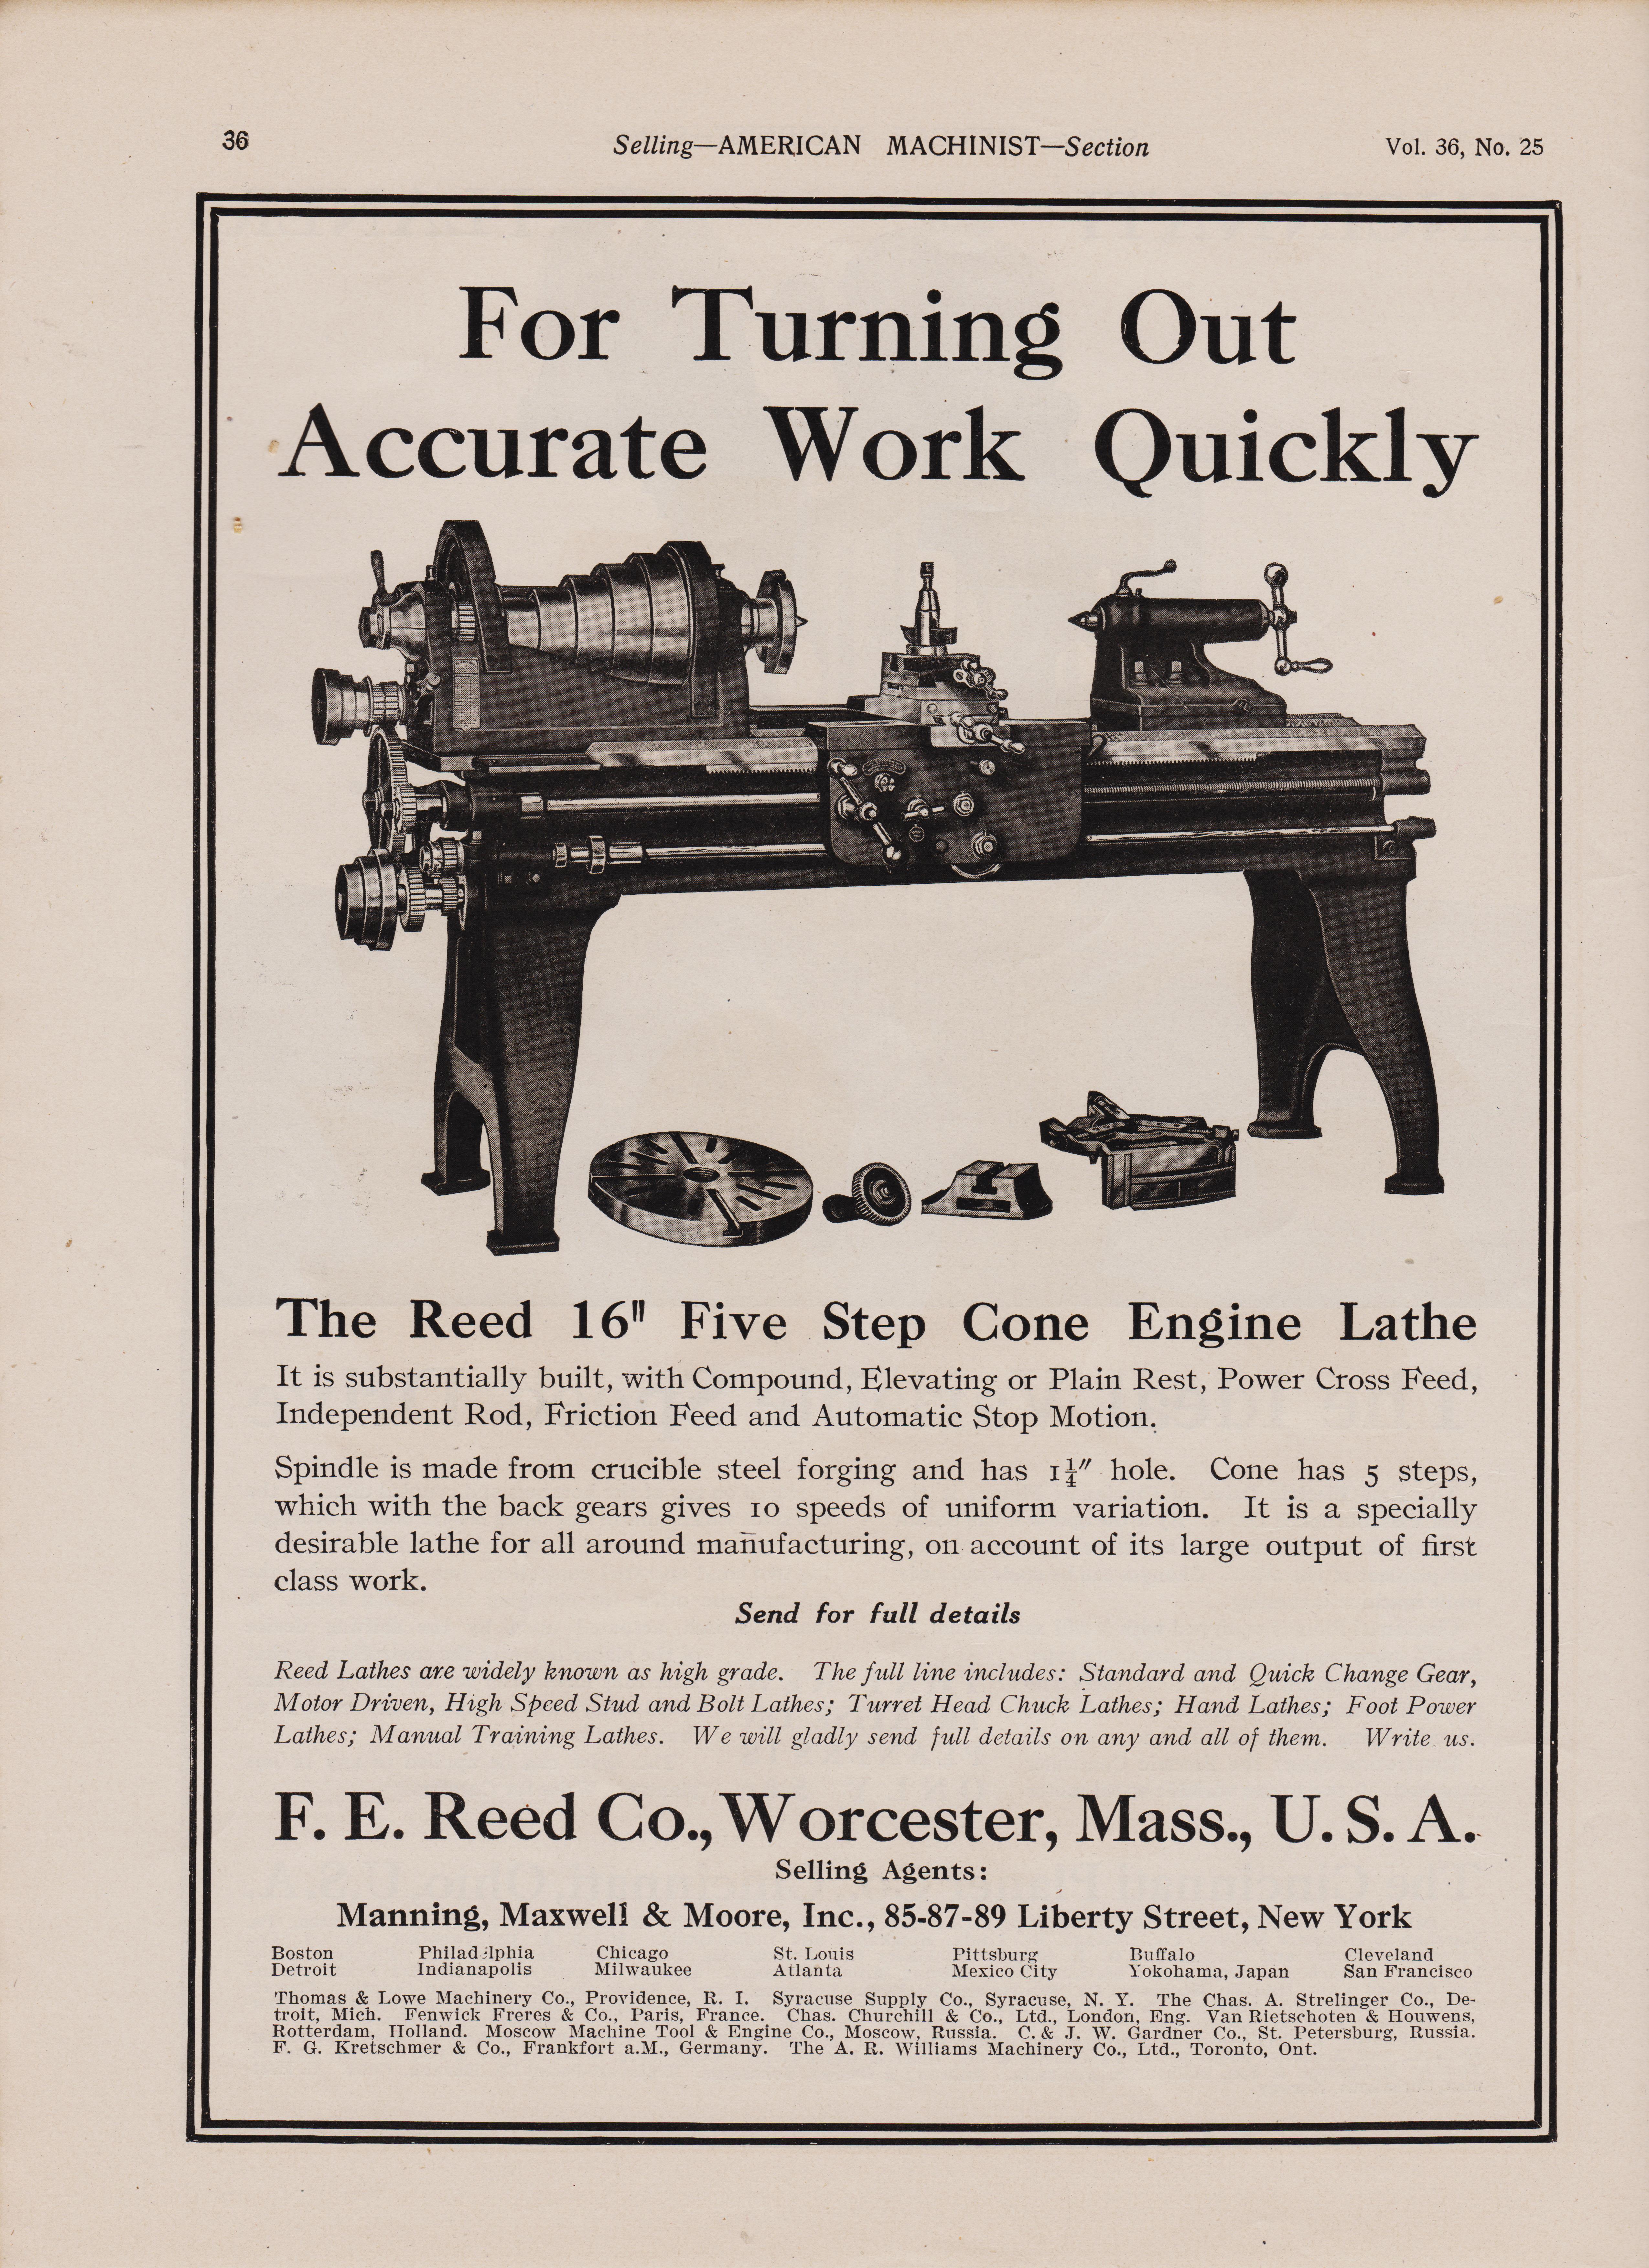 https://antiquemachinery.com/images-2021/1912-American-Machinist-Magazine-1912-June-pg-36-F-E-Reed-Co-Cone-head-Engine-Lathe.jpeg